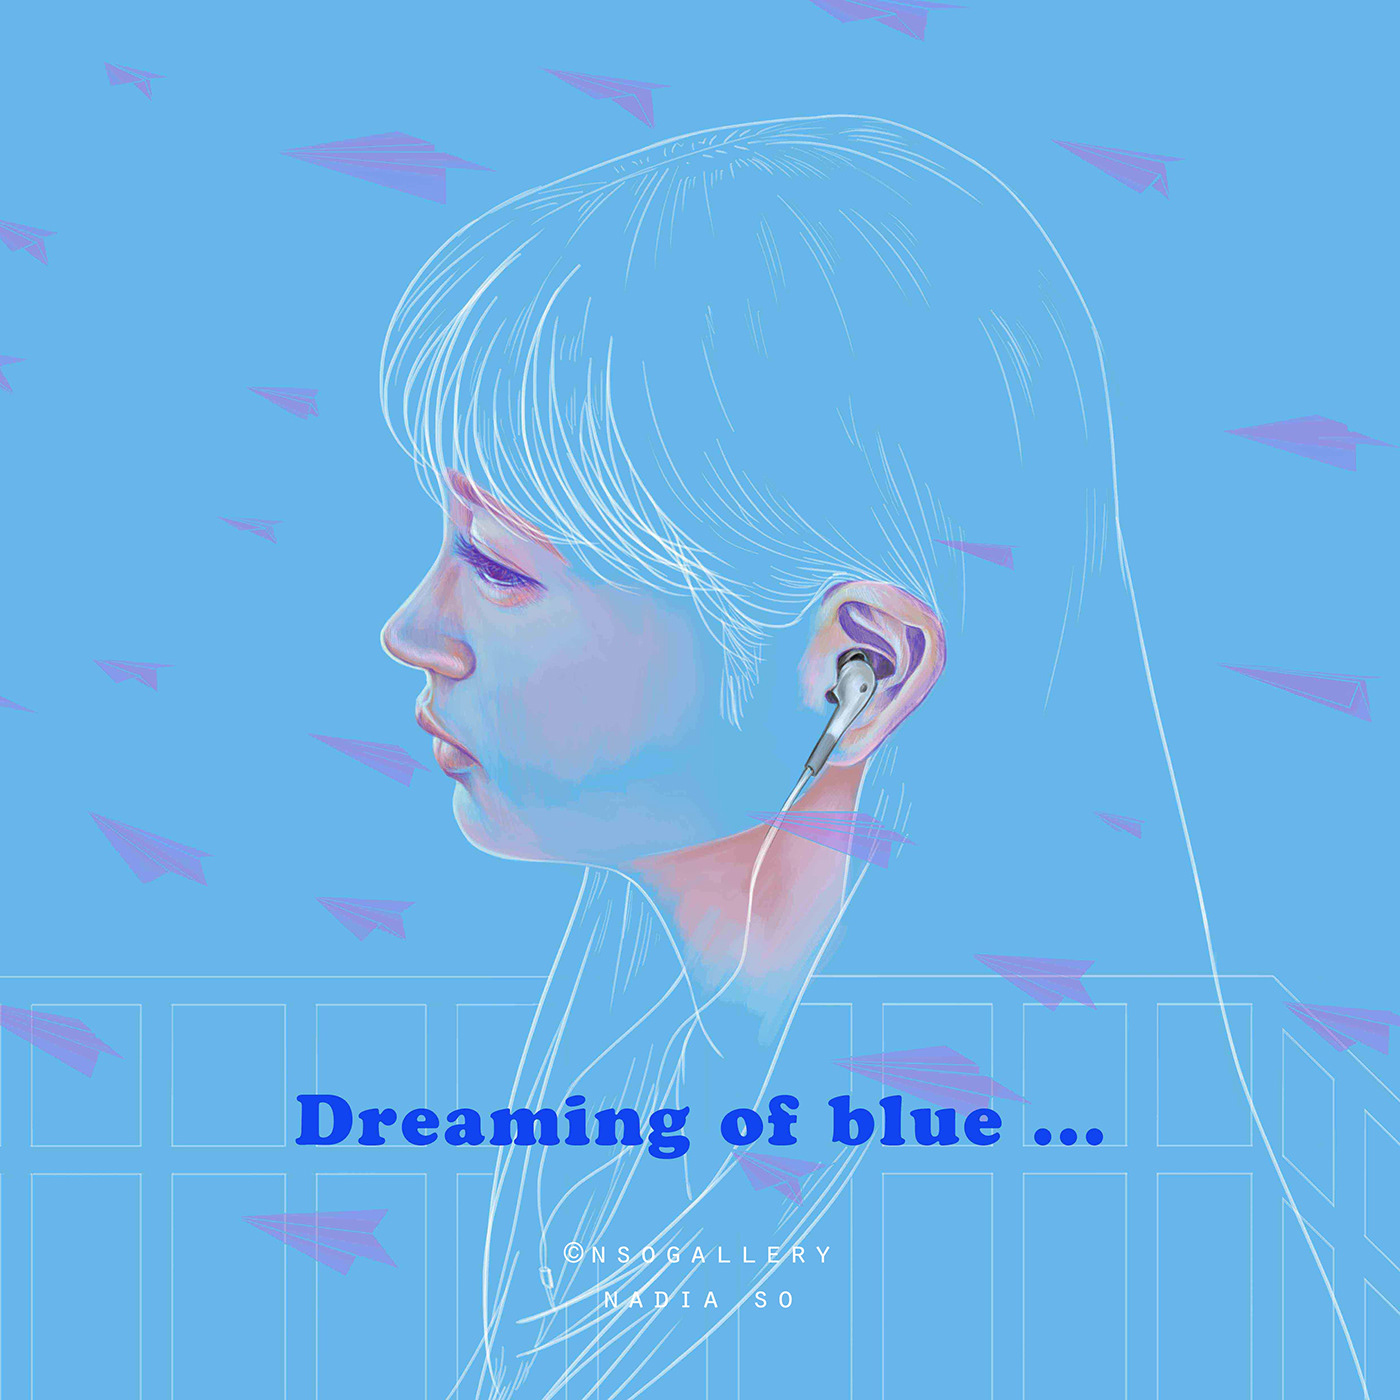 Bluedream
Digital Painting
Adobe Photoshop

Dawn hours
Clear blue sky
Cold breeze in December